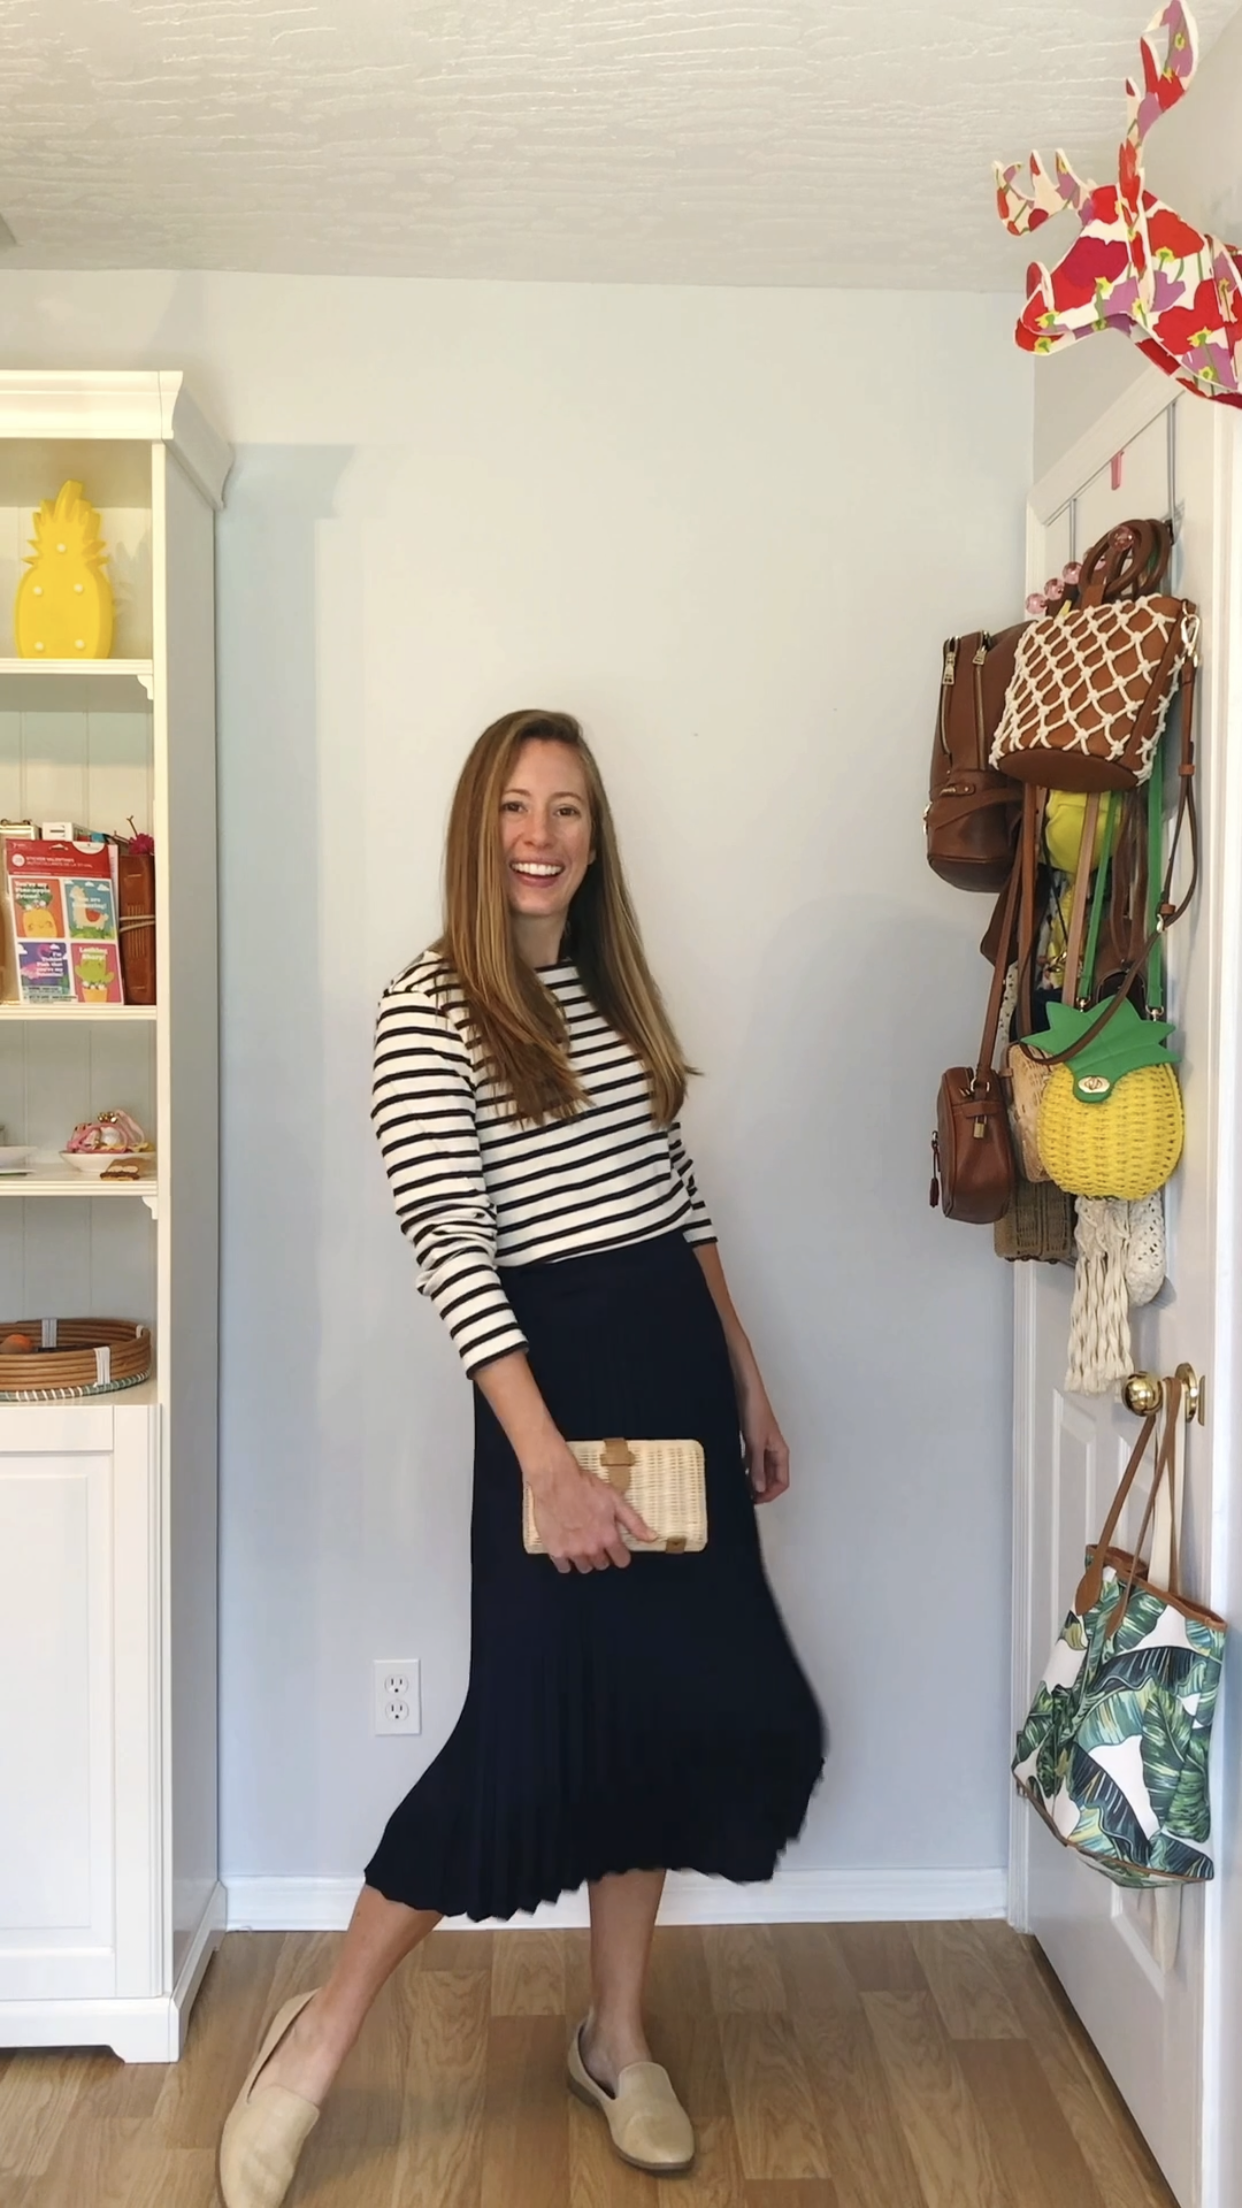 3 Ways to Wear a Long Sleeve Striped Shirt / Causal Winter Outfit / Beach Outfit / Midi Skirt / Coastal Style / Striped Top / Sunshine Style - A Florida Fashion Blog by Katie